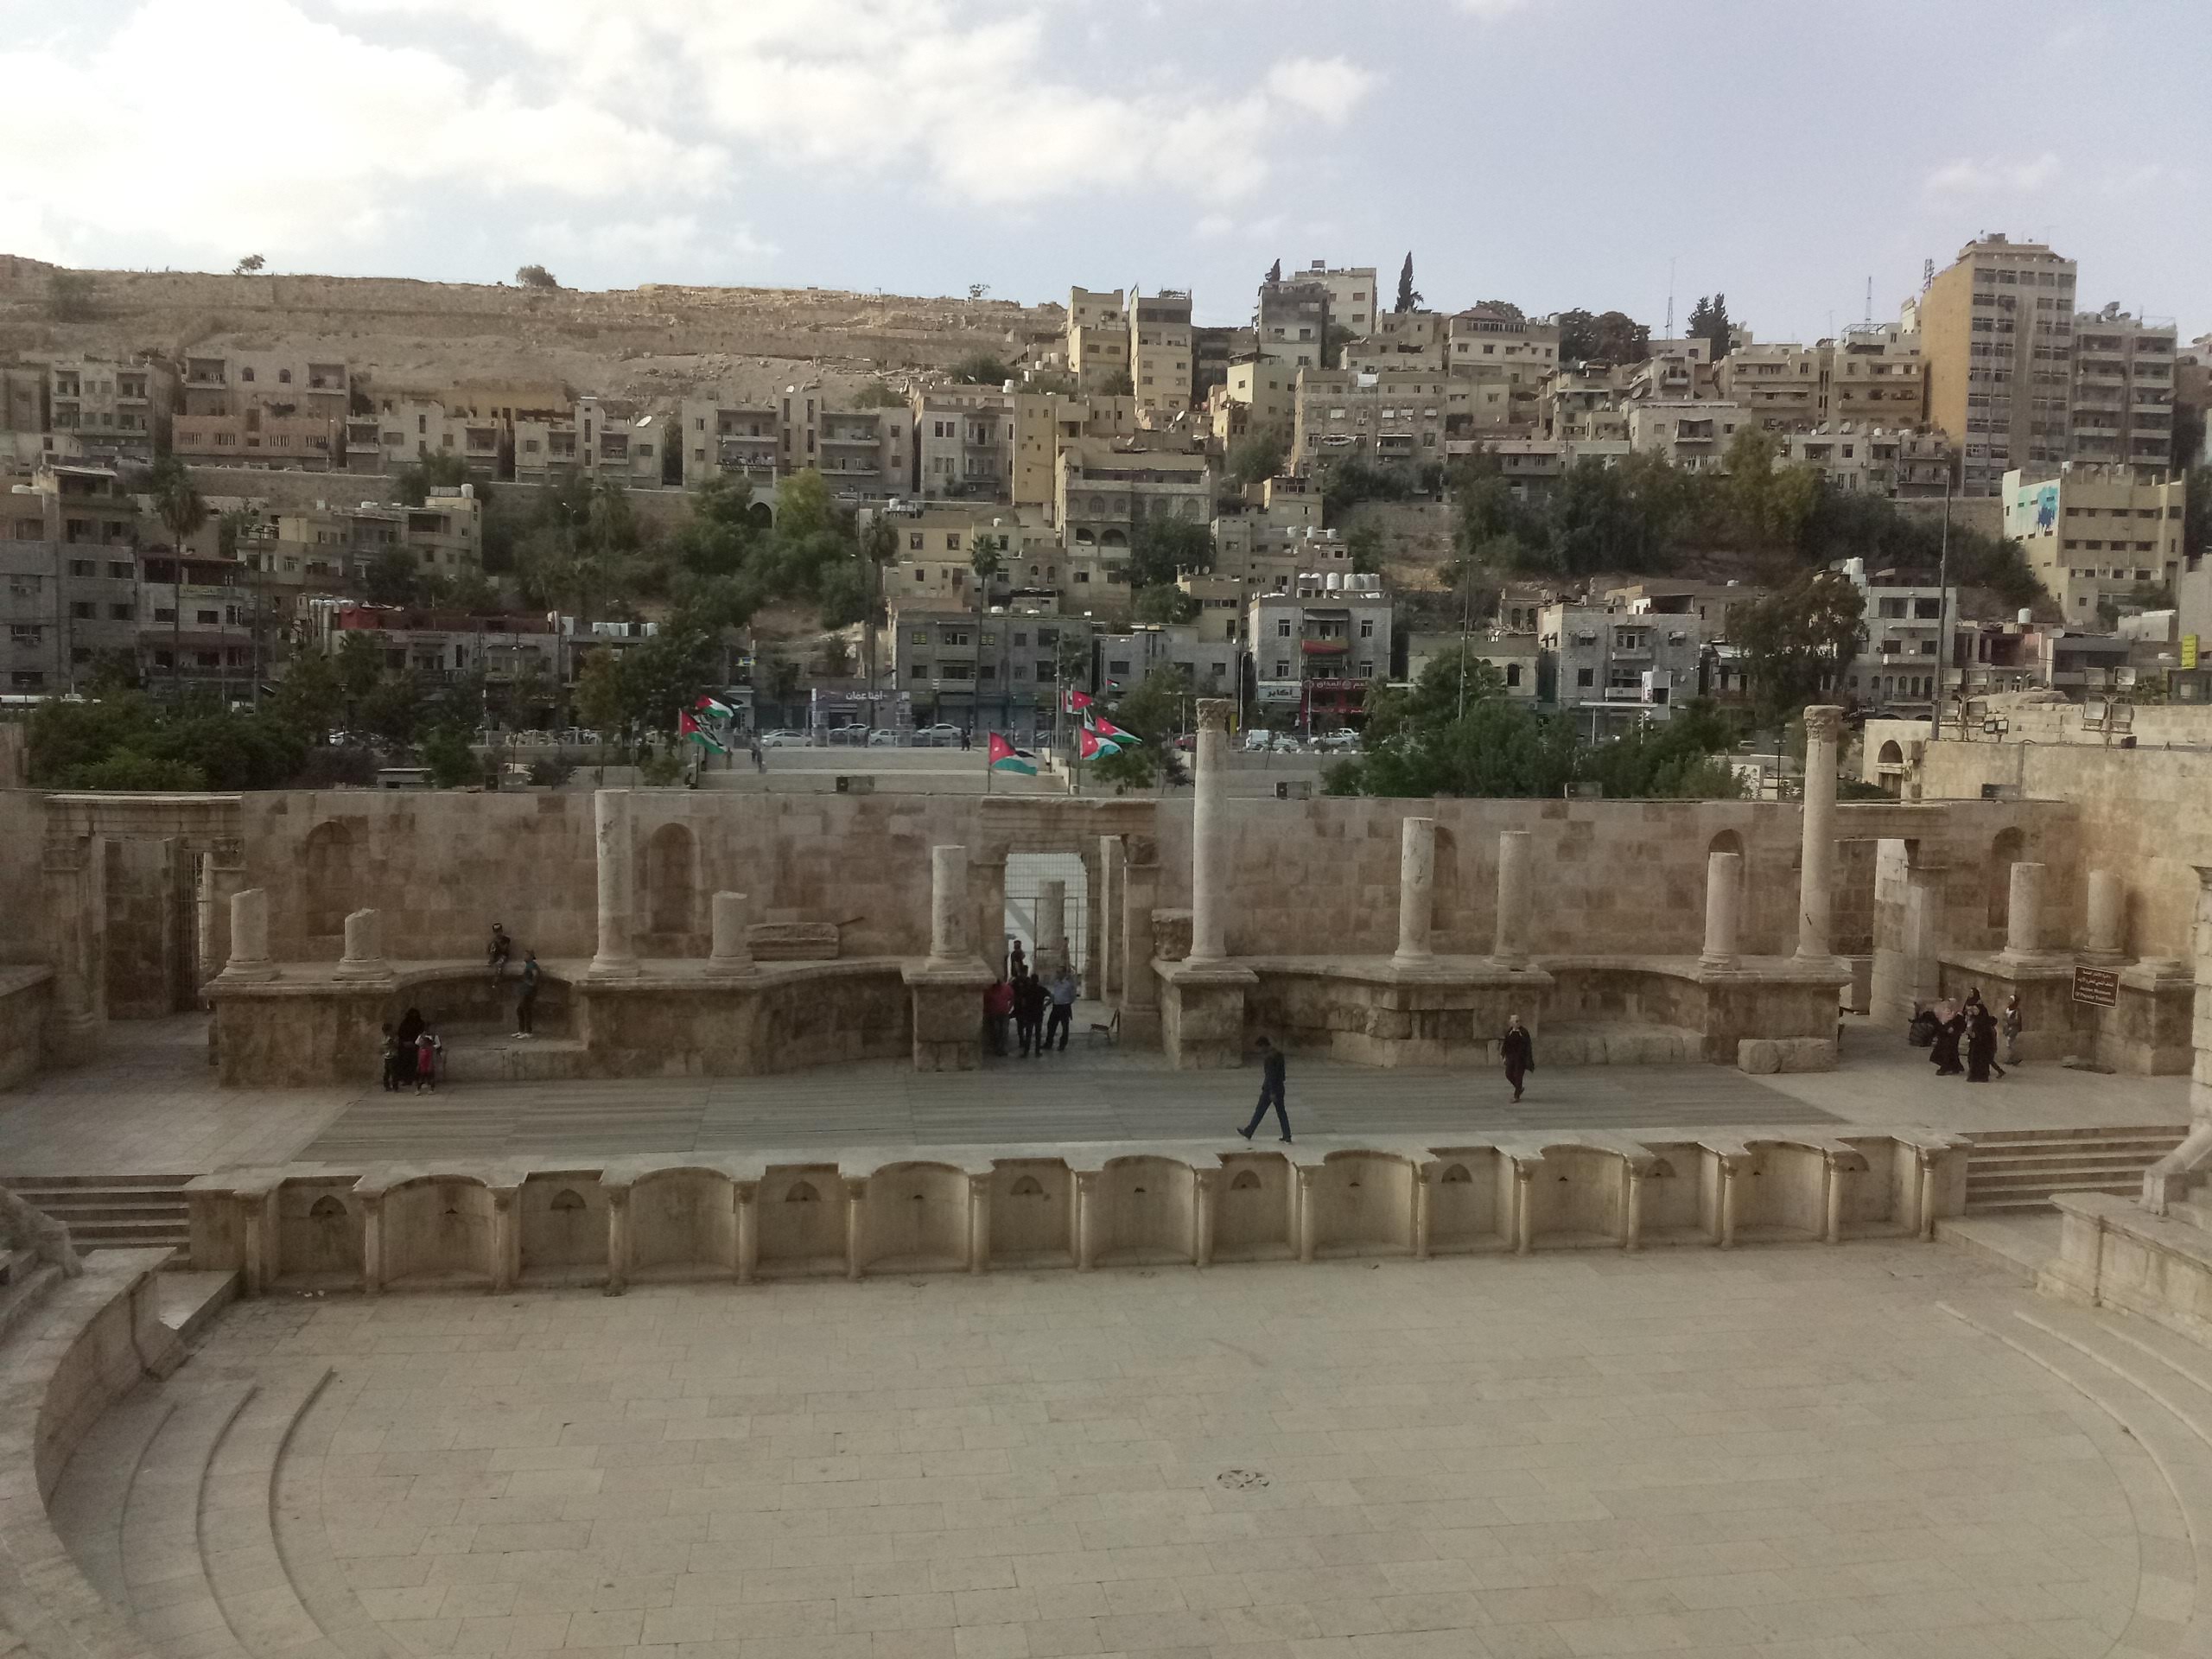 View of the City of Amman from the Amphitheater